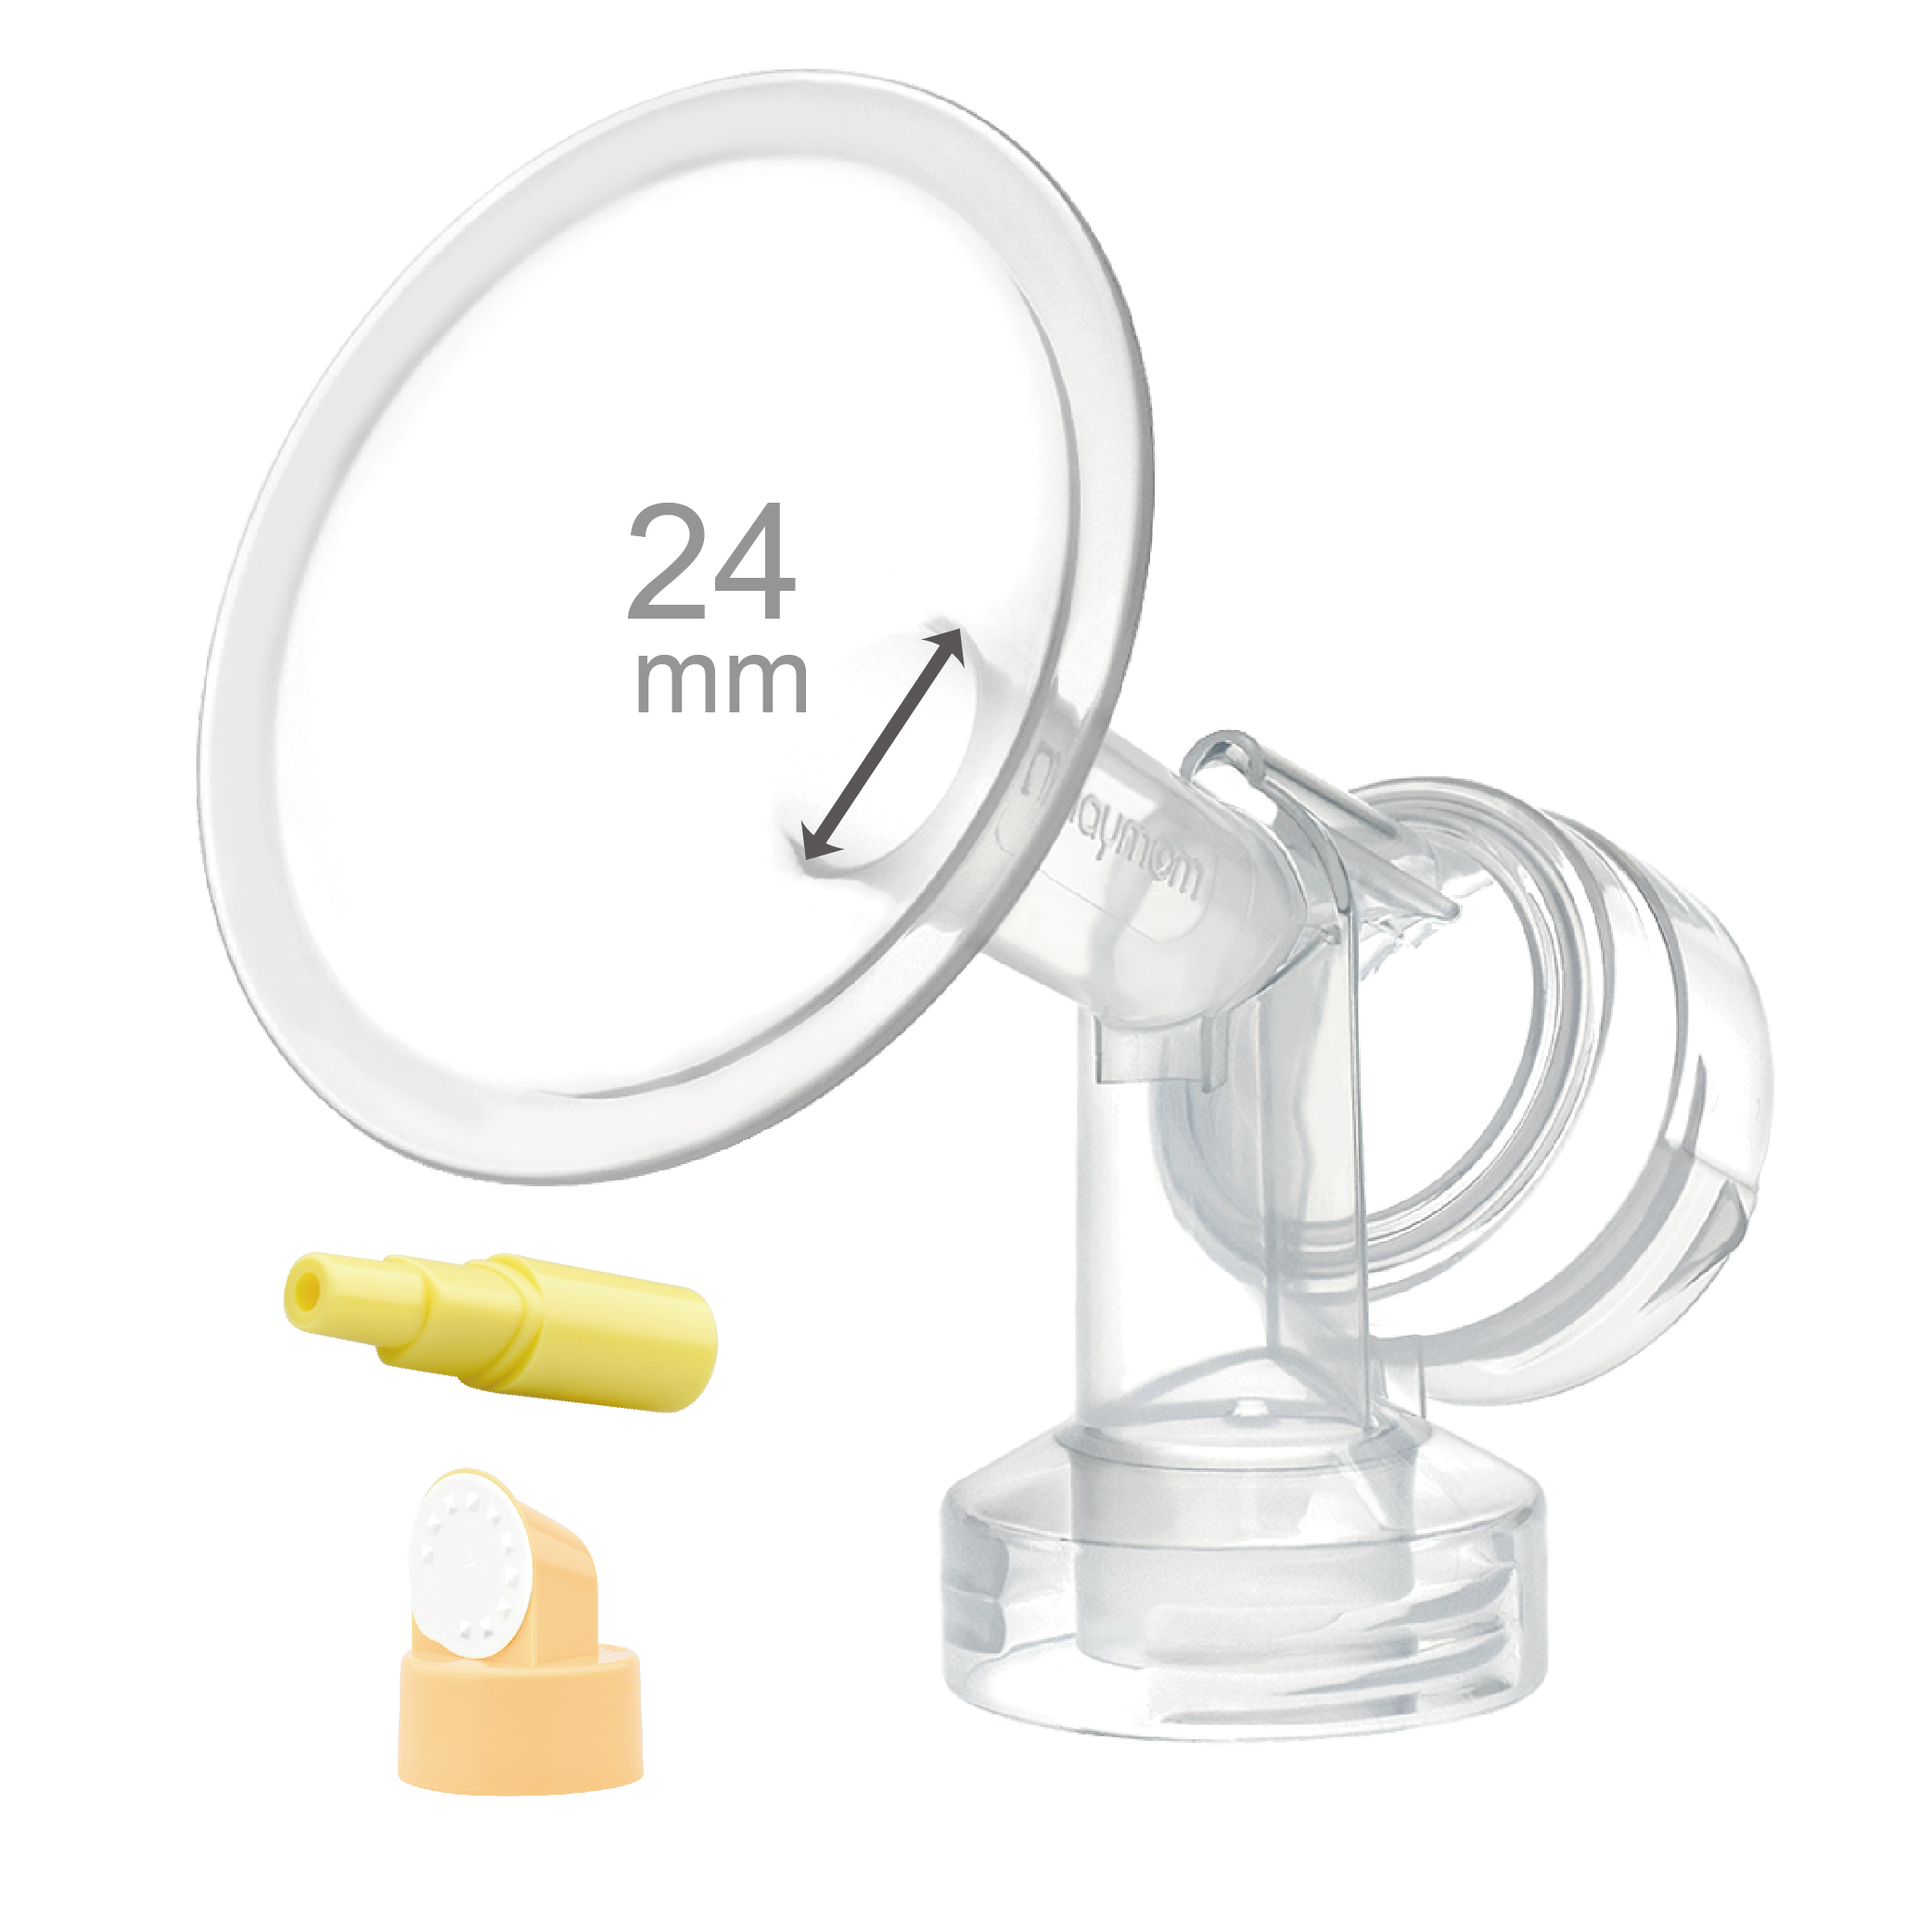 (image for) 24 mm Extra Small Flange w/ Valve and Membrane for SpeCtra Breast Pumps S1, S2, M1, Spectra 9; Narrow (Standard) Bottle Neck; 1 pc